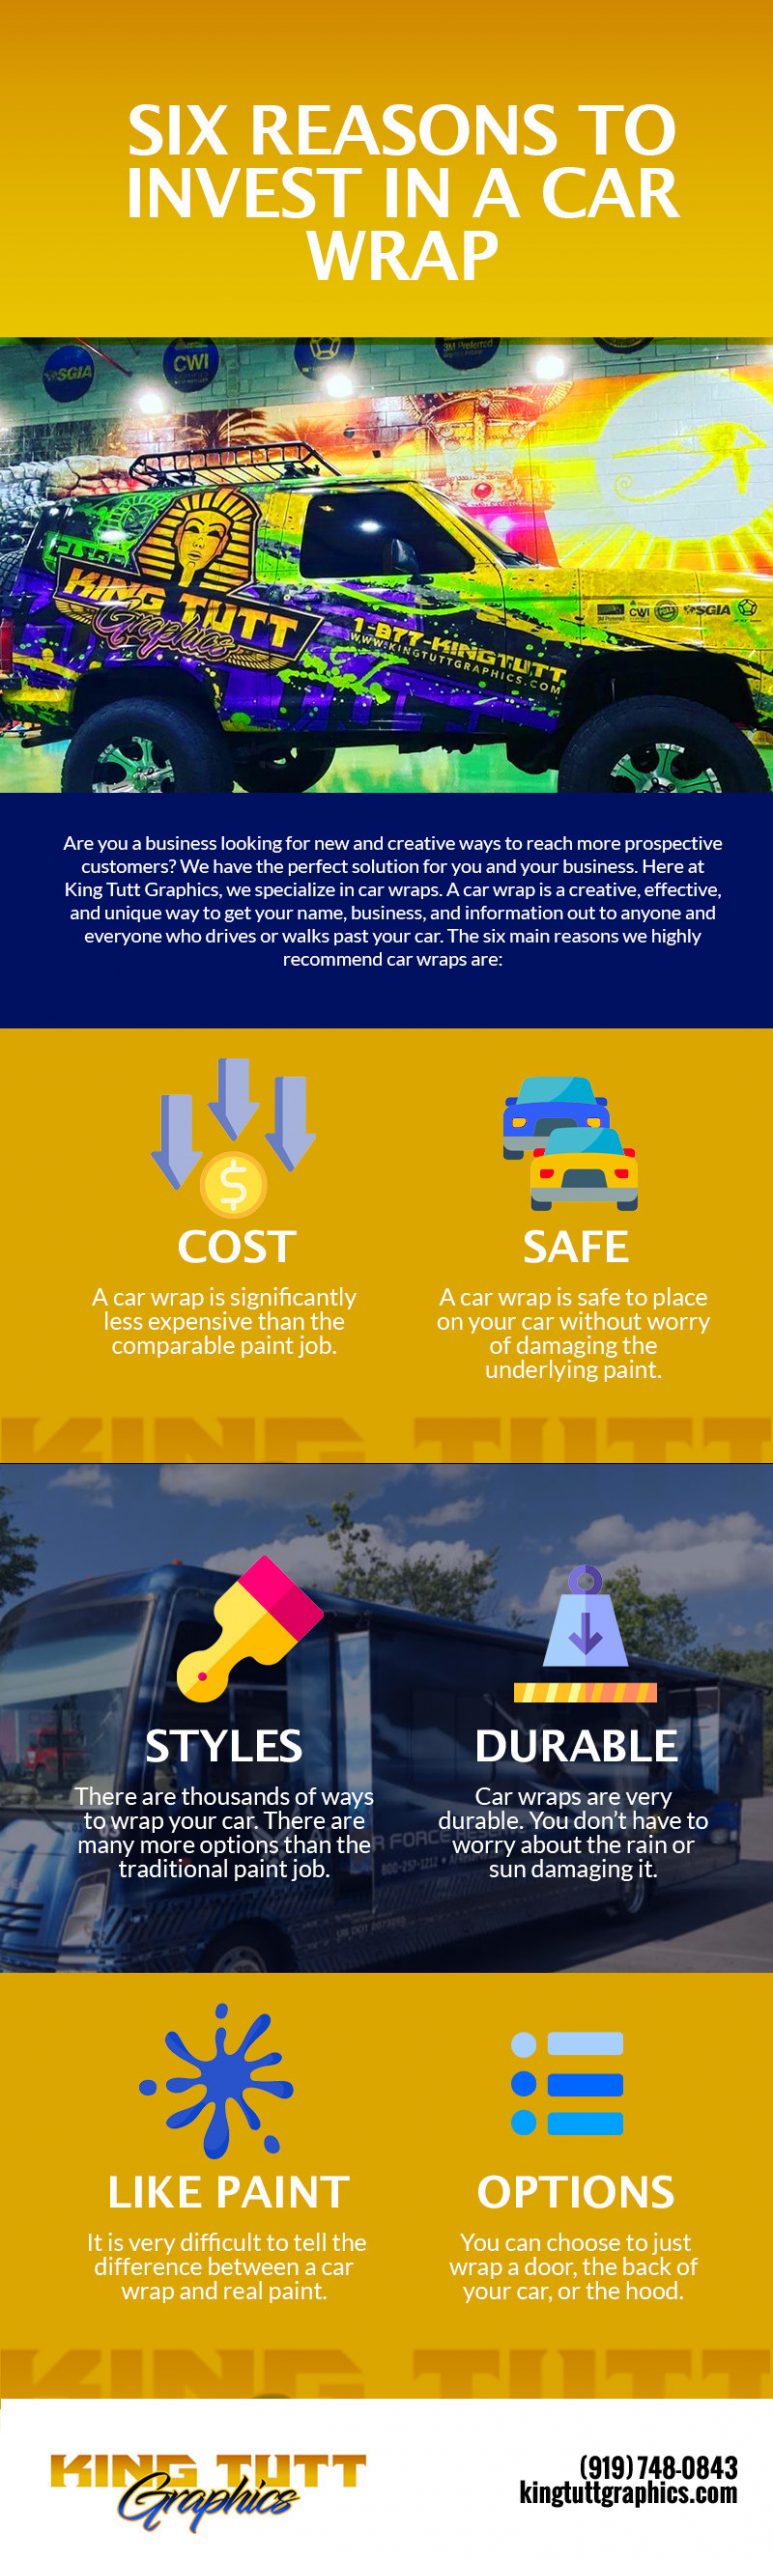 Six Reasons to Invest in a Car Wrap